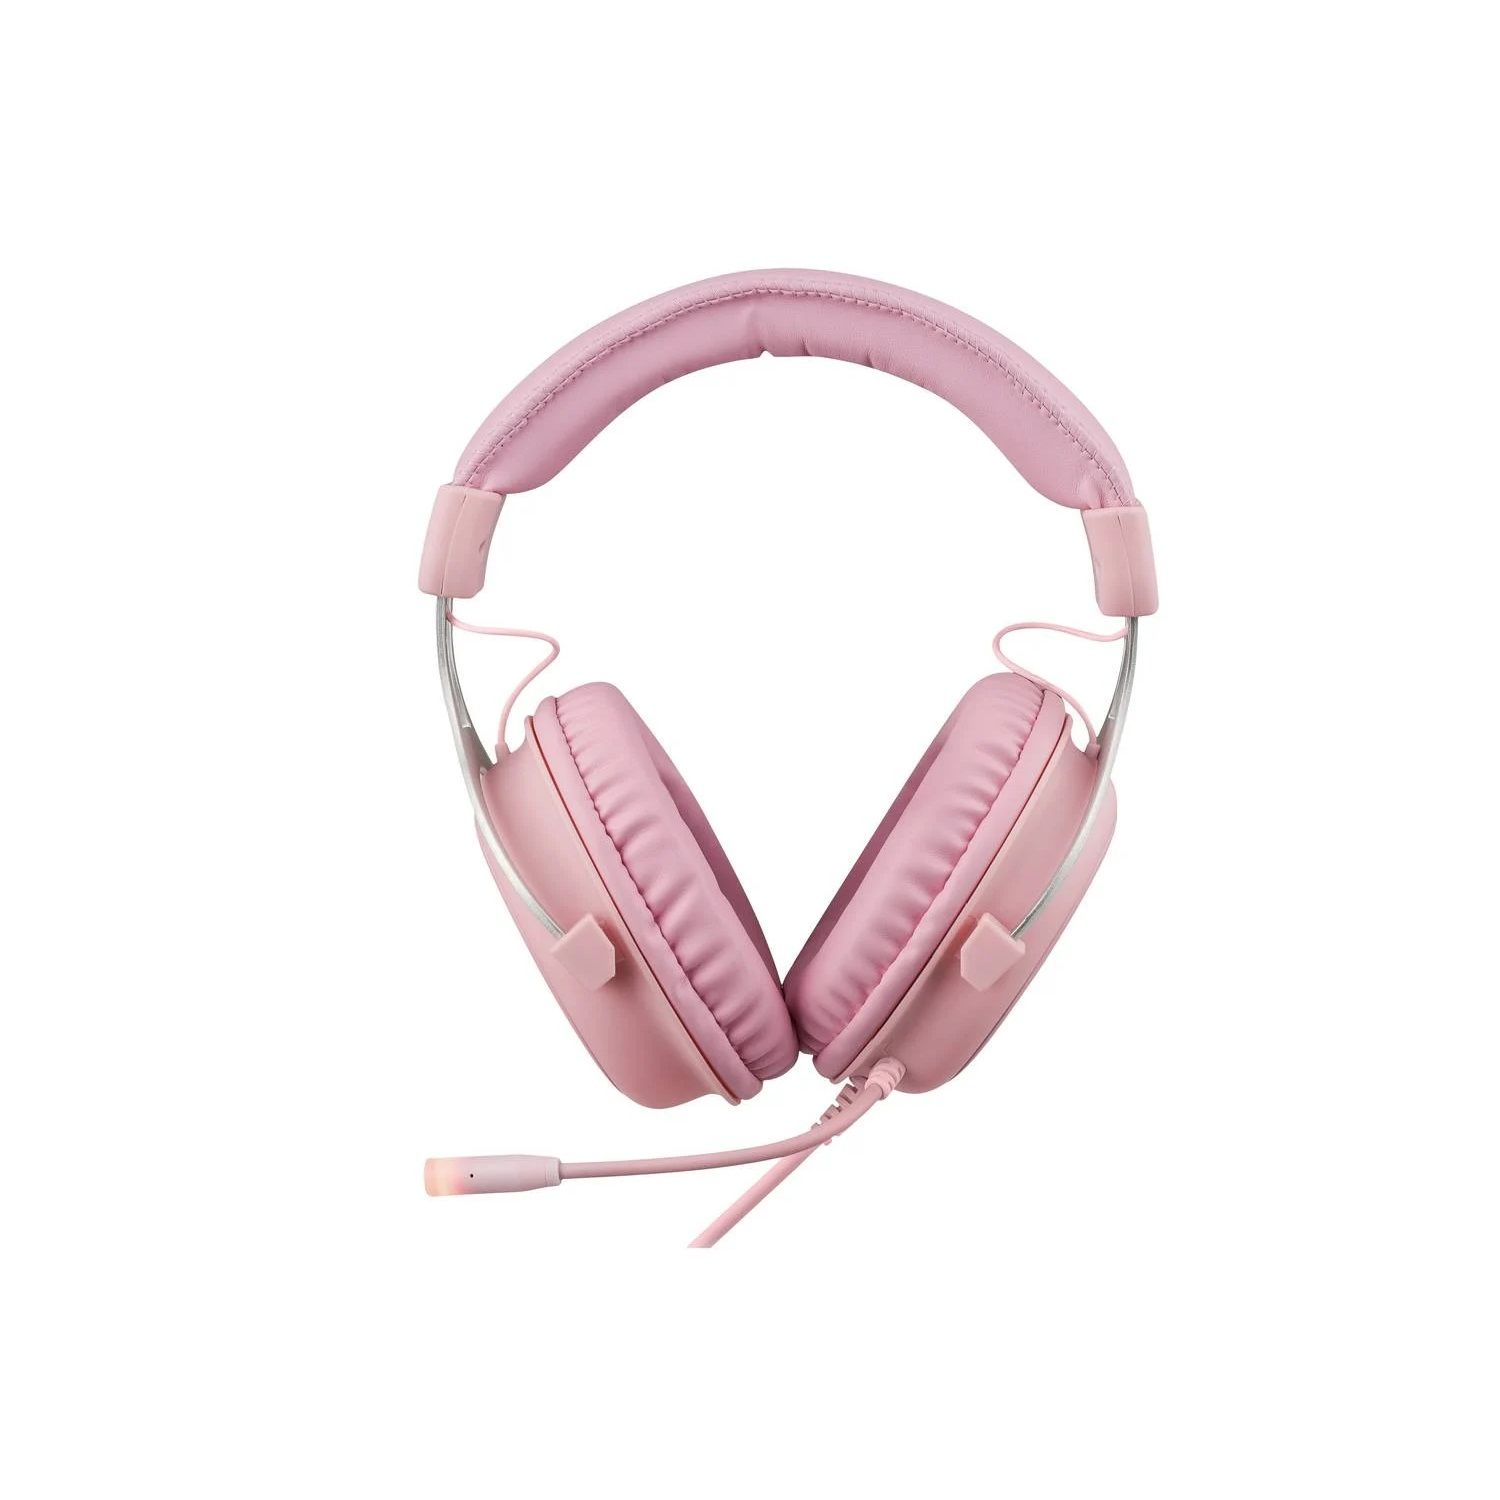 Headset LED-Beleuchtung, GAMING pink DELTACO Over-ear mit Headset Gamer